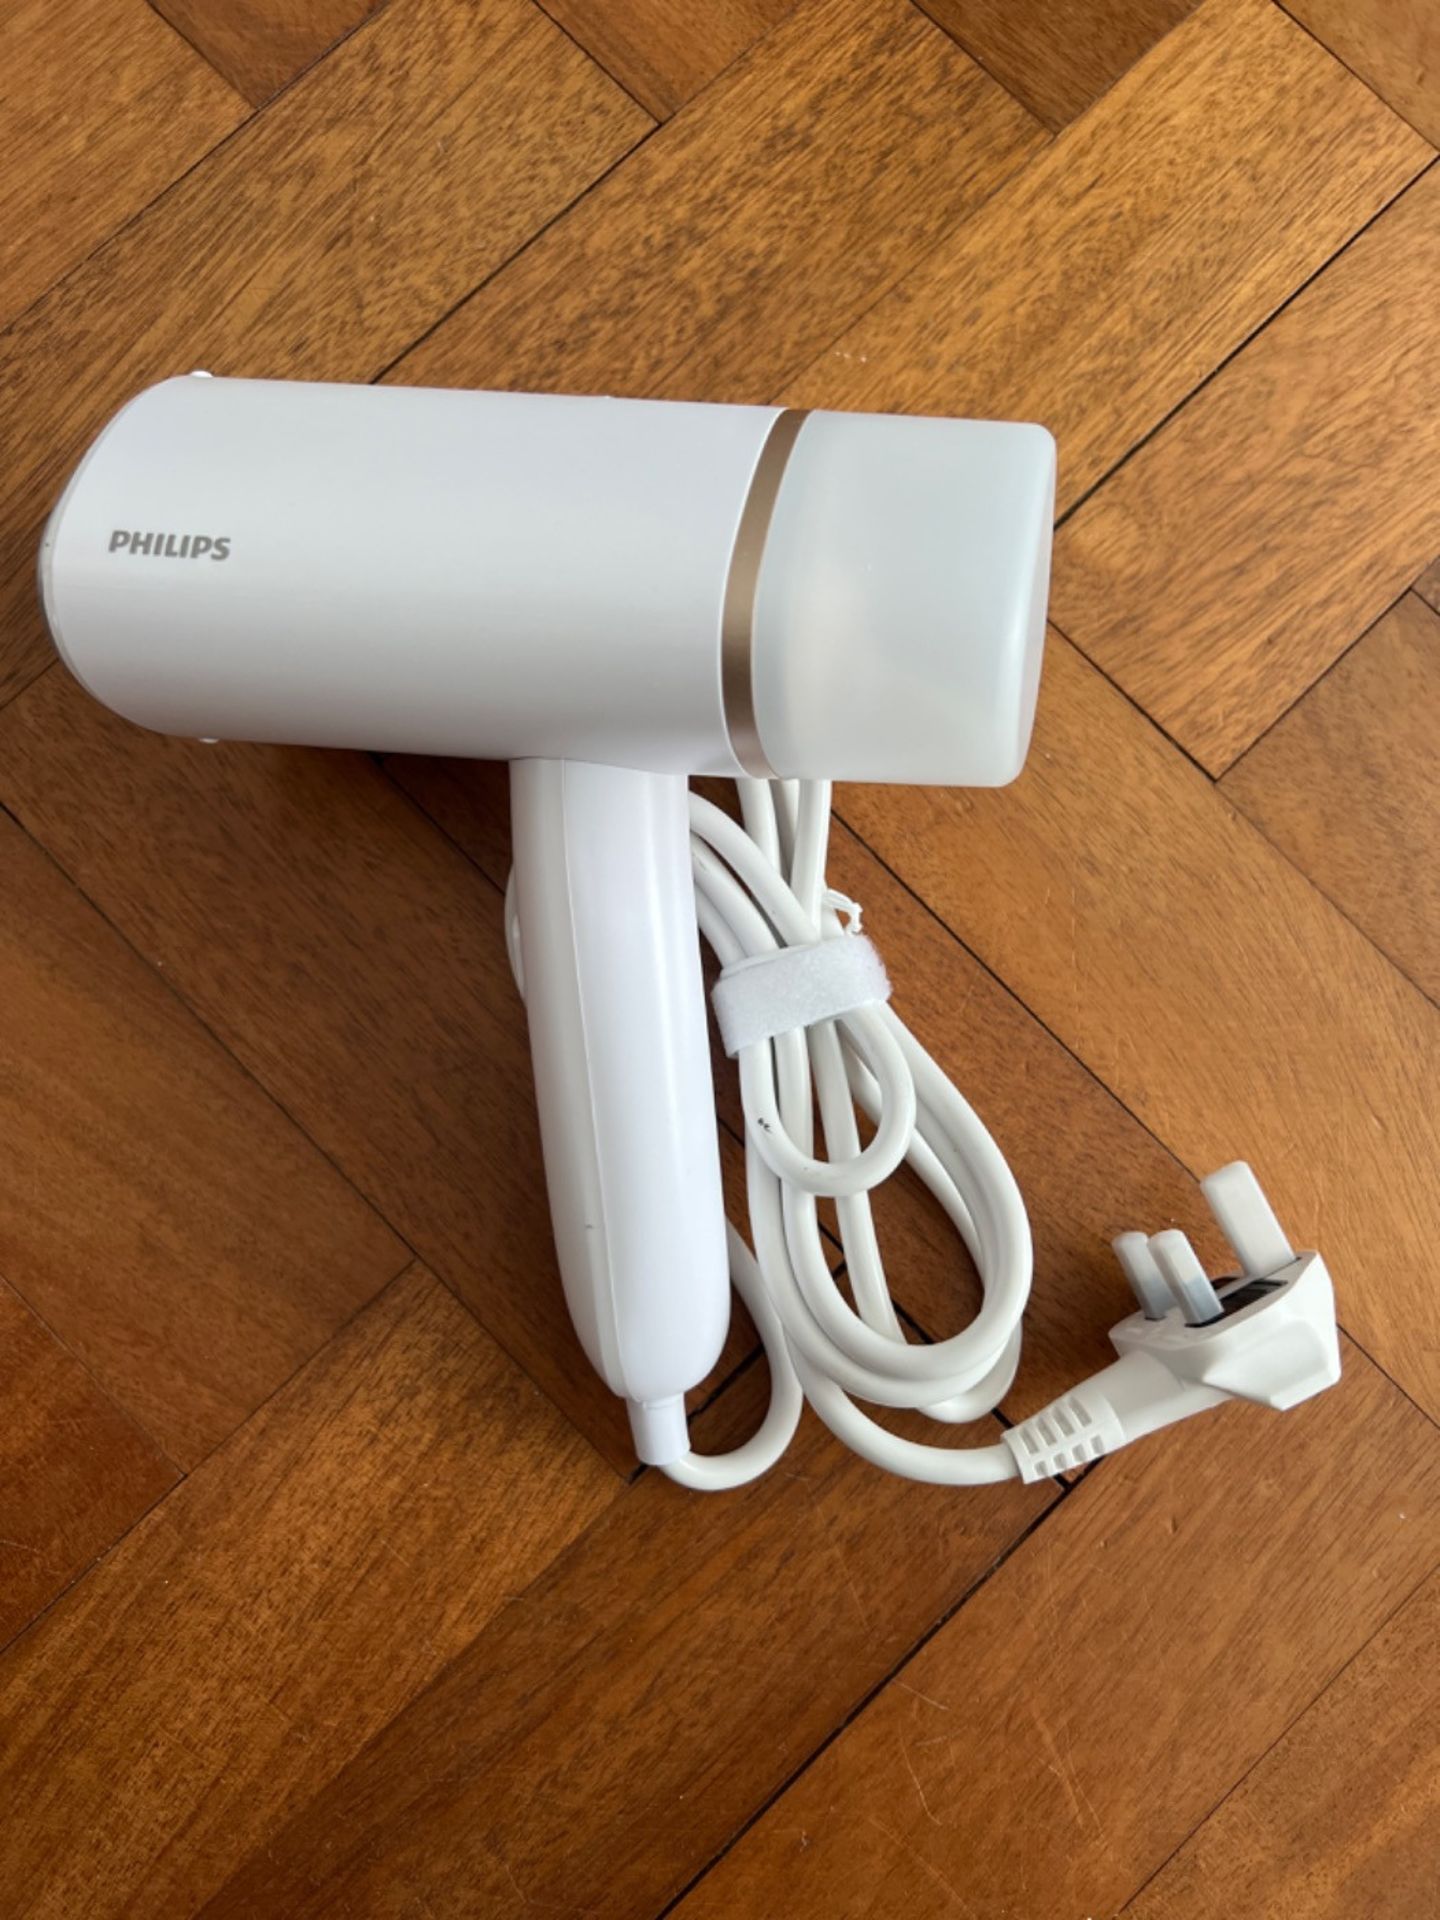 Philips Handheld Steamer 3000 Series, Compact and Foldable, Ready to Use in ˜30 Seconds, No Ironin